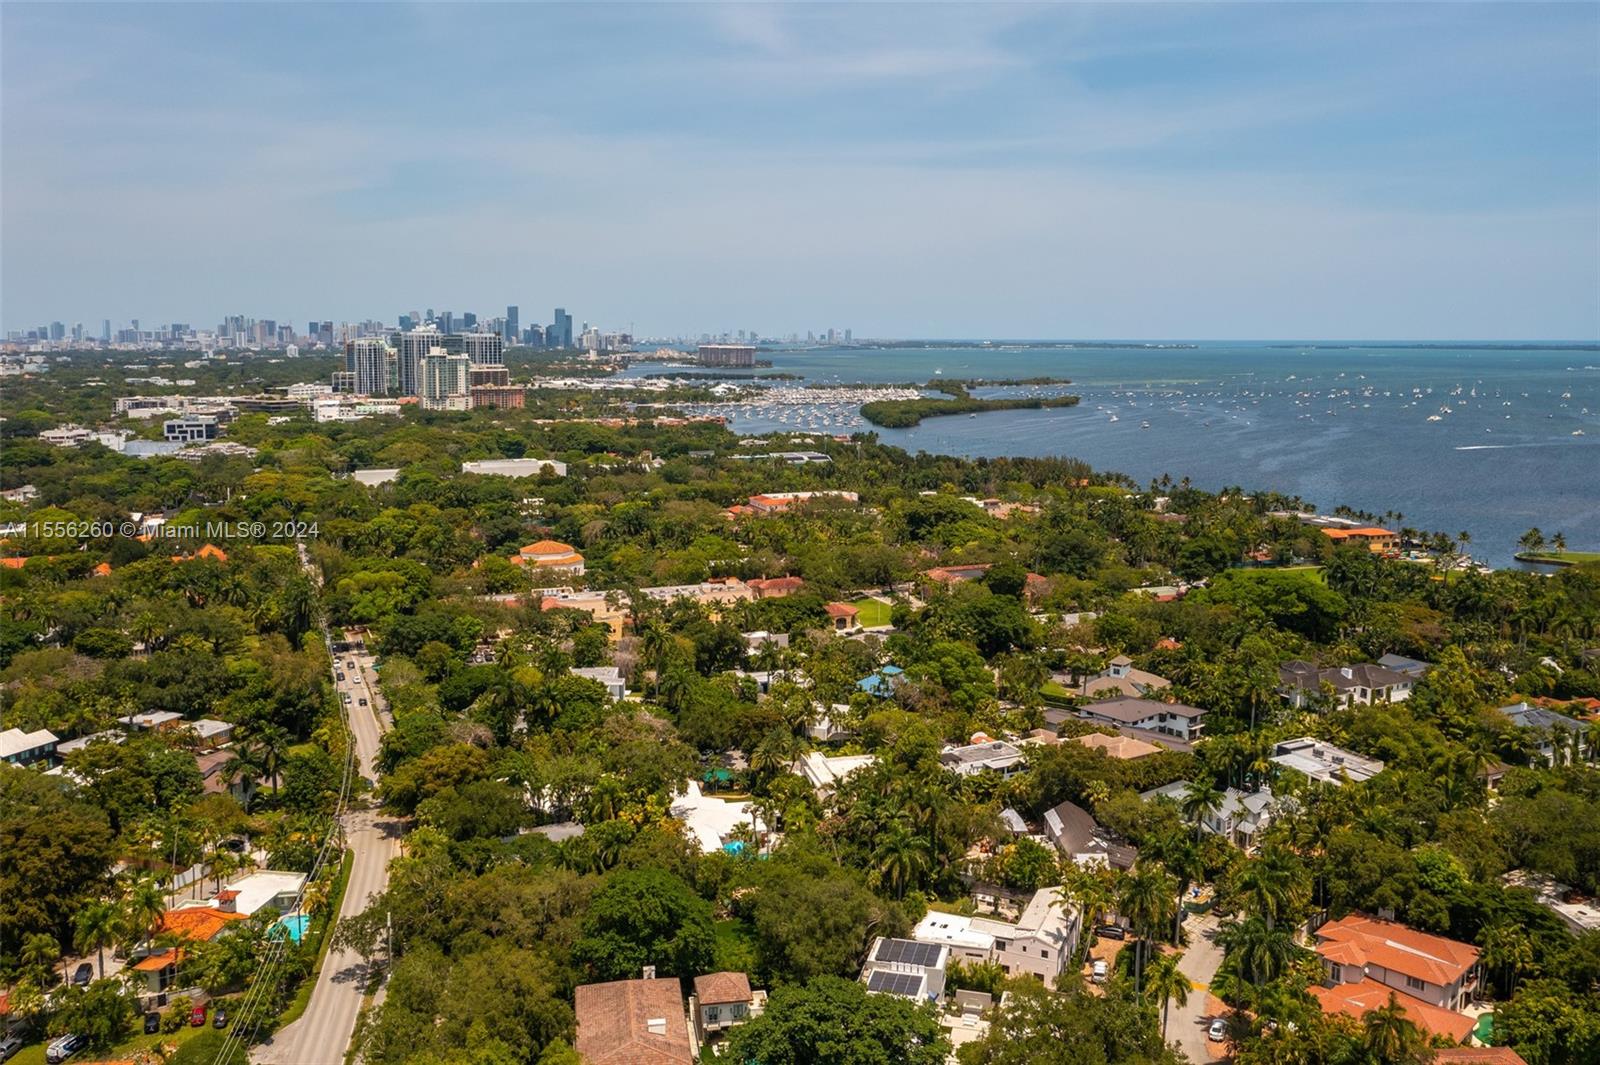 3470 Poinciana Ave, Coconut Grove, Florida 33133, 5 Bedrooms Bedrooms, ,6 BathroomsBathrooms,Residential,For Sale,3470 Poinciana Ave,A11556260